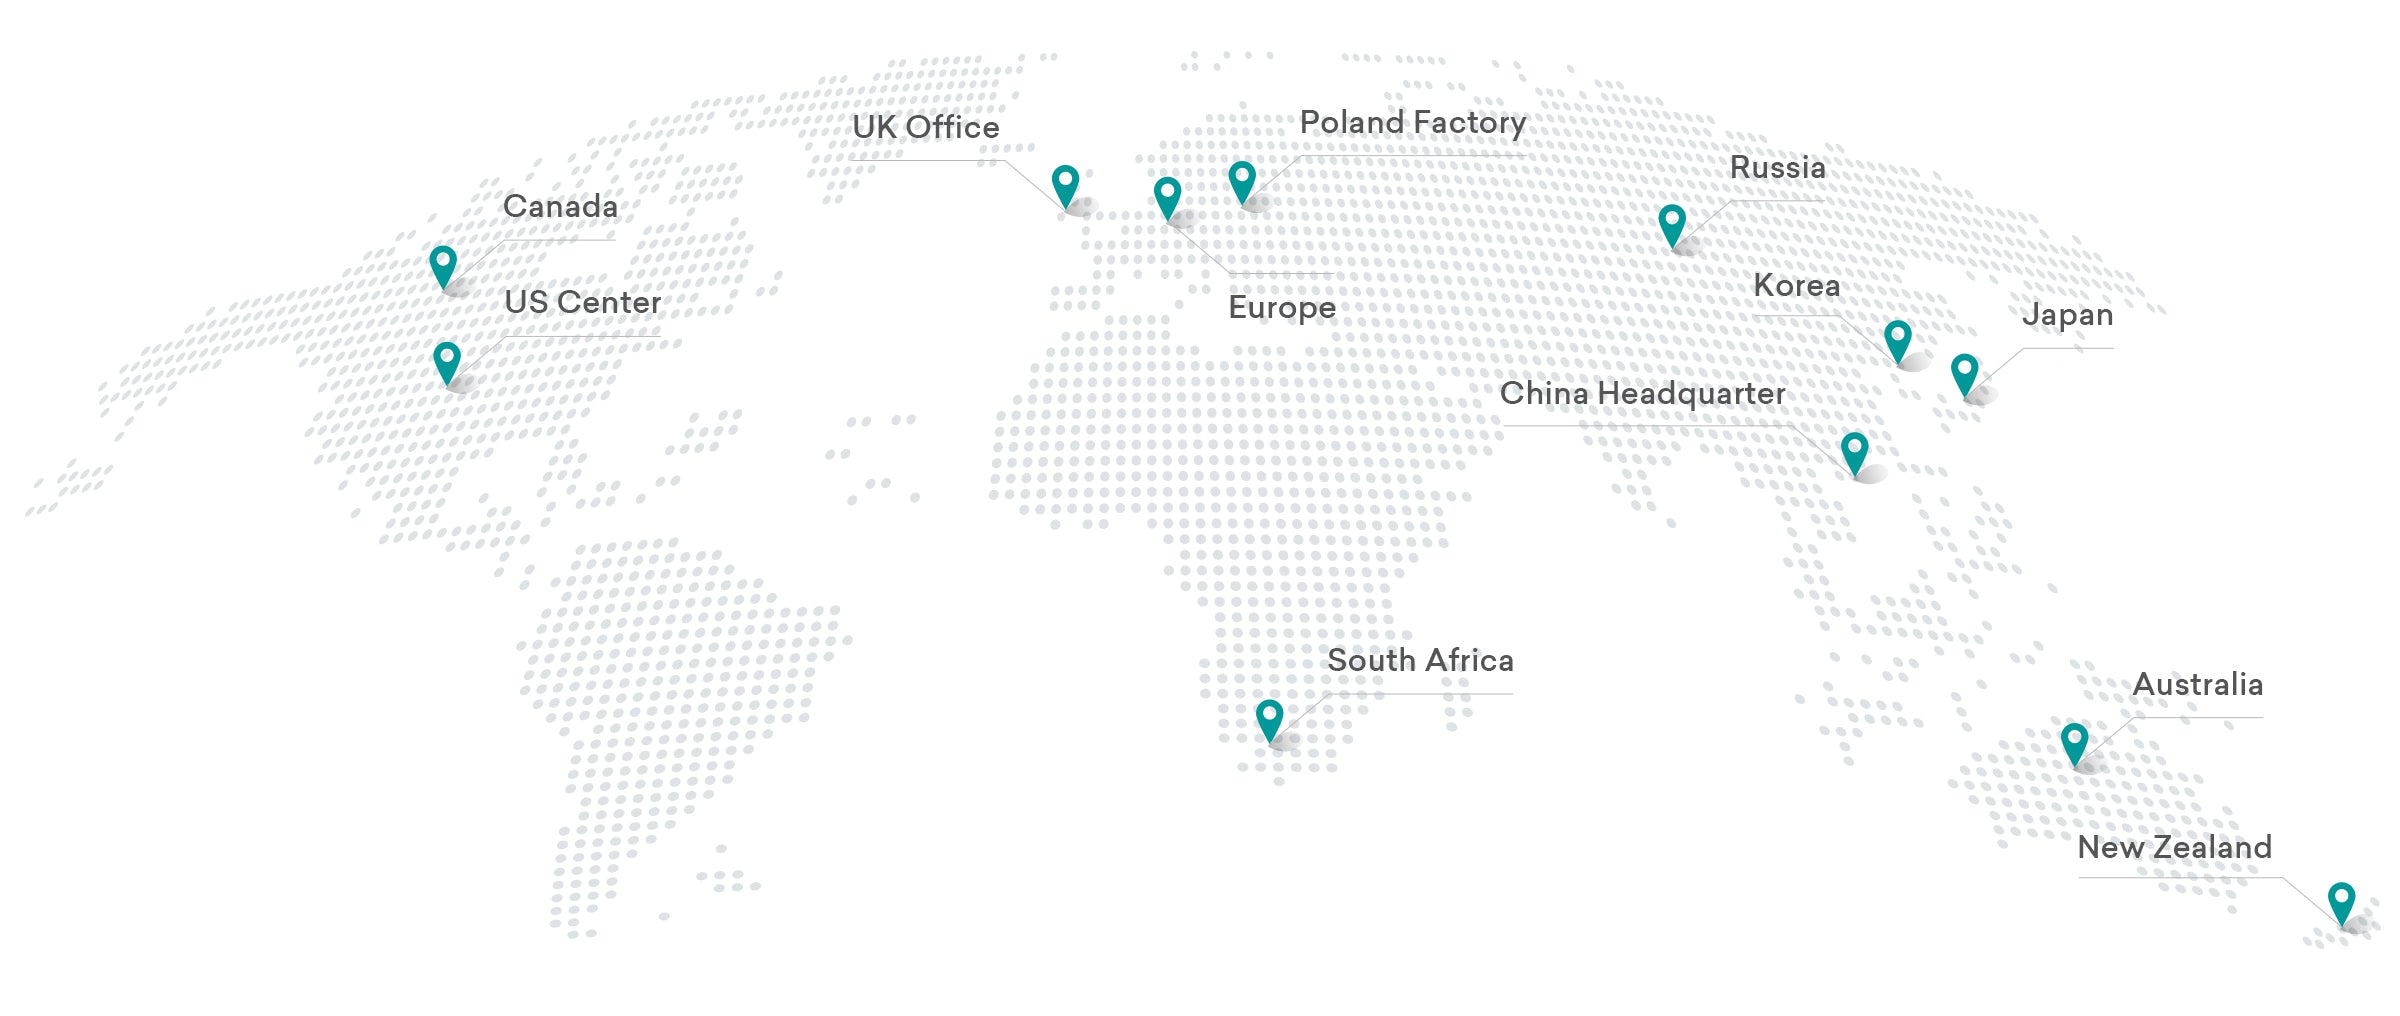 Hangsen’s branches, offices, and business partners are located all over the world.